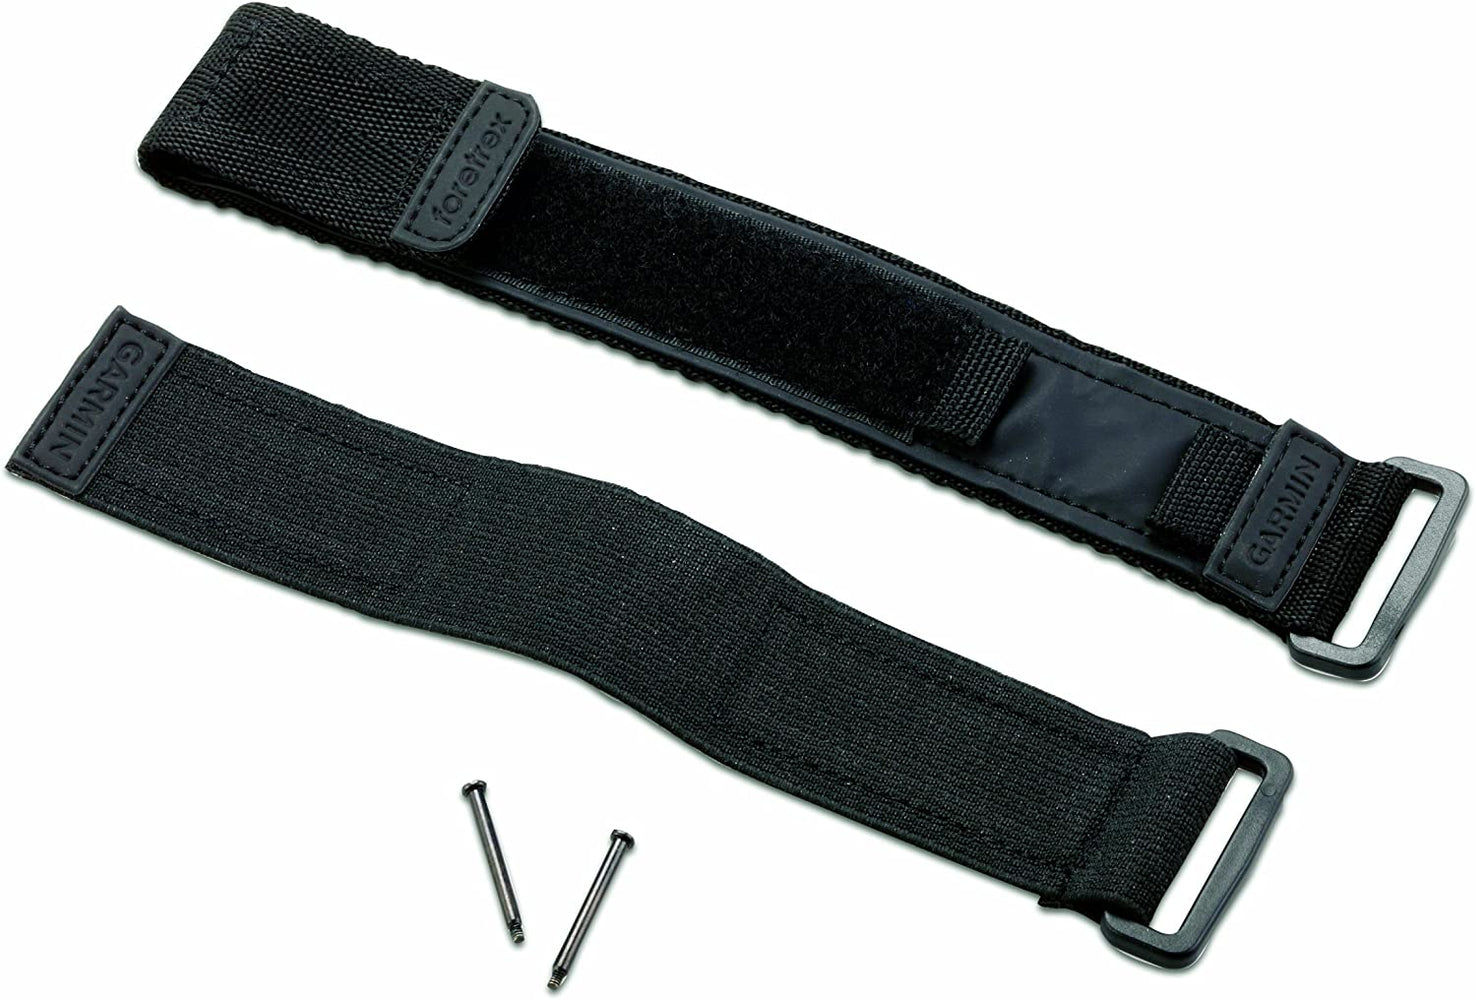 Garmin Hook and loop wrist strap (expander strap with screws included)